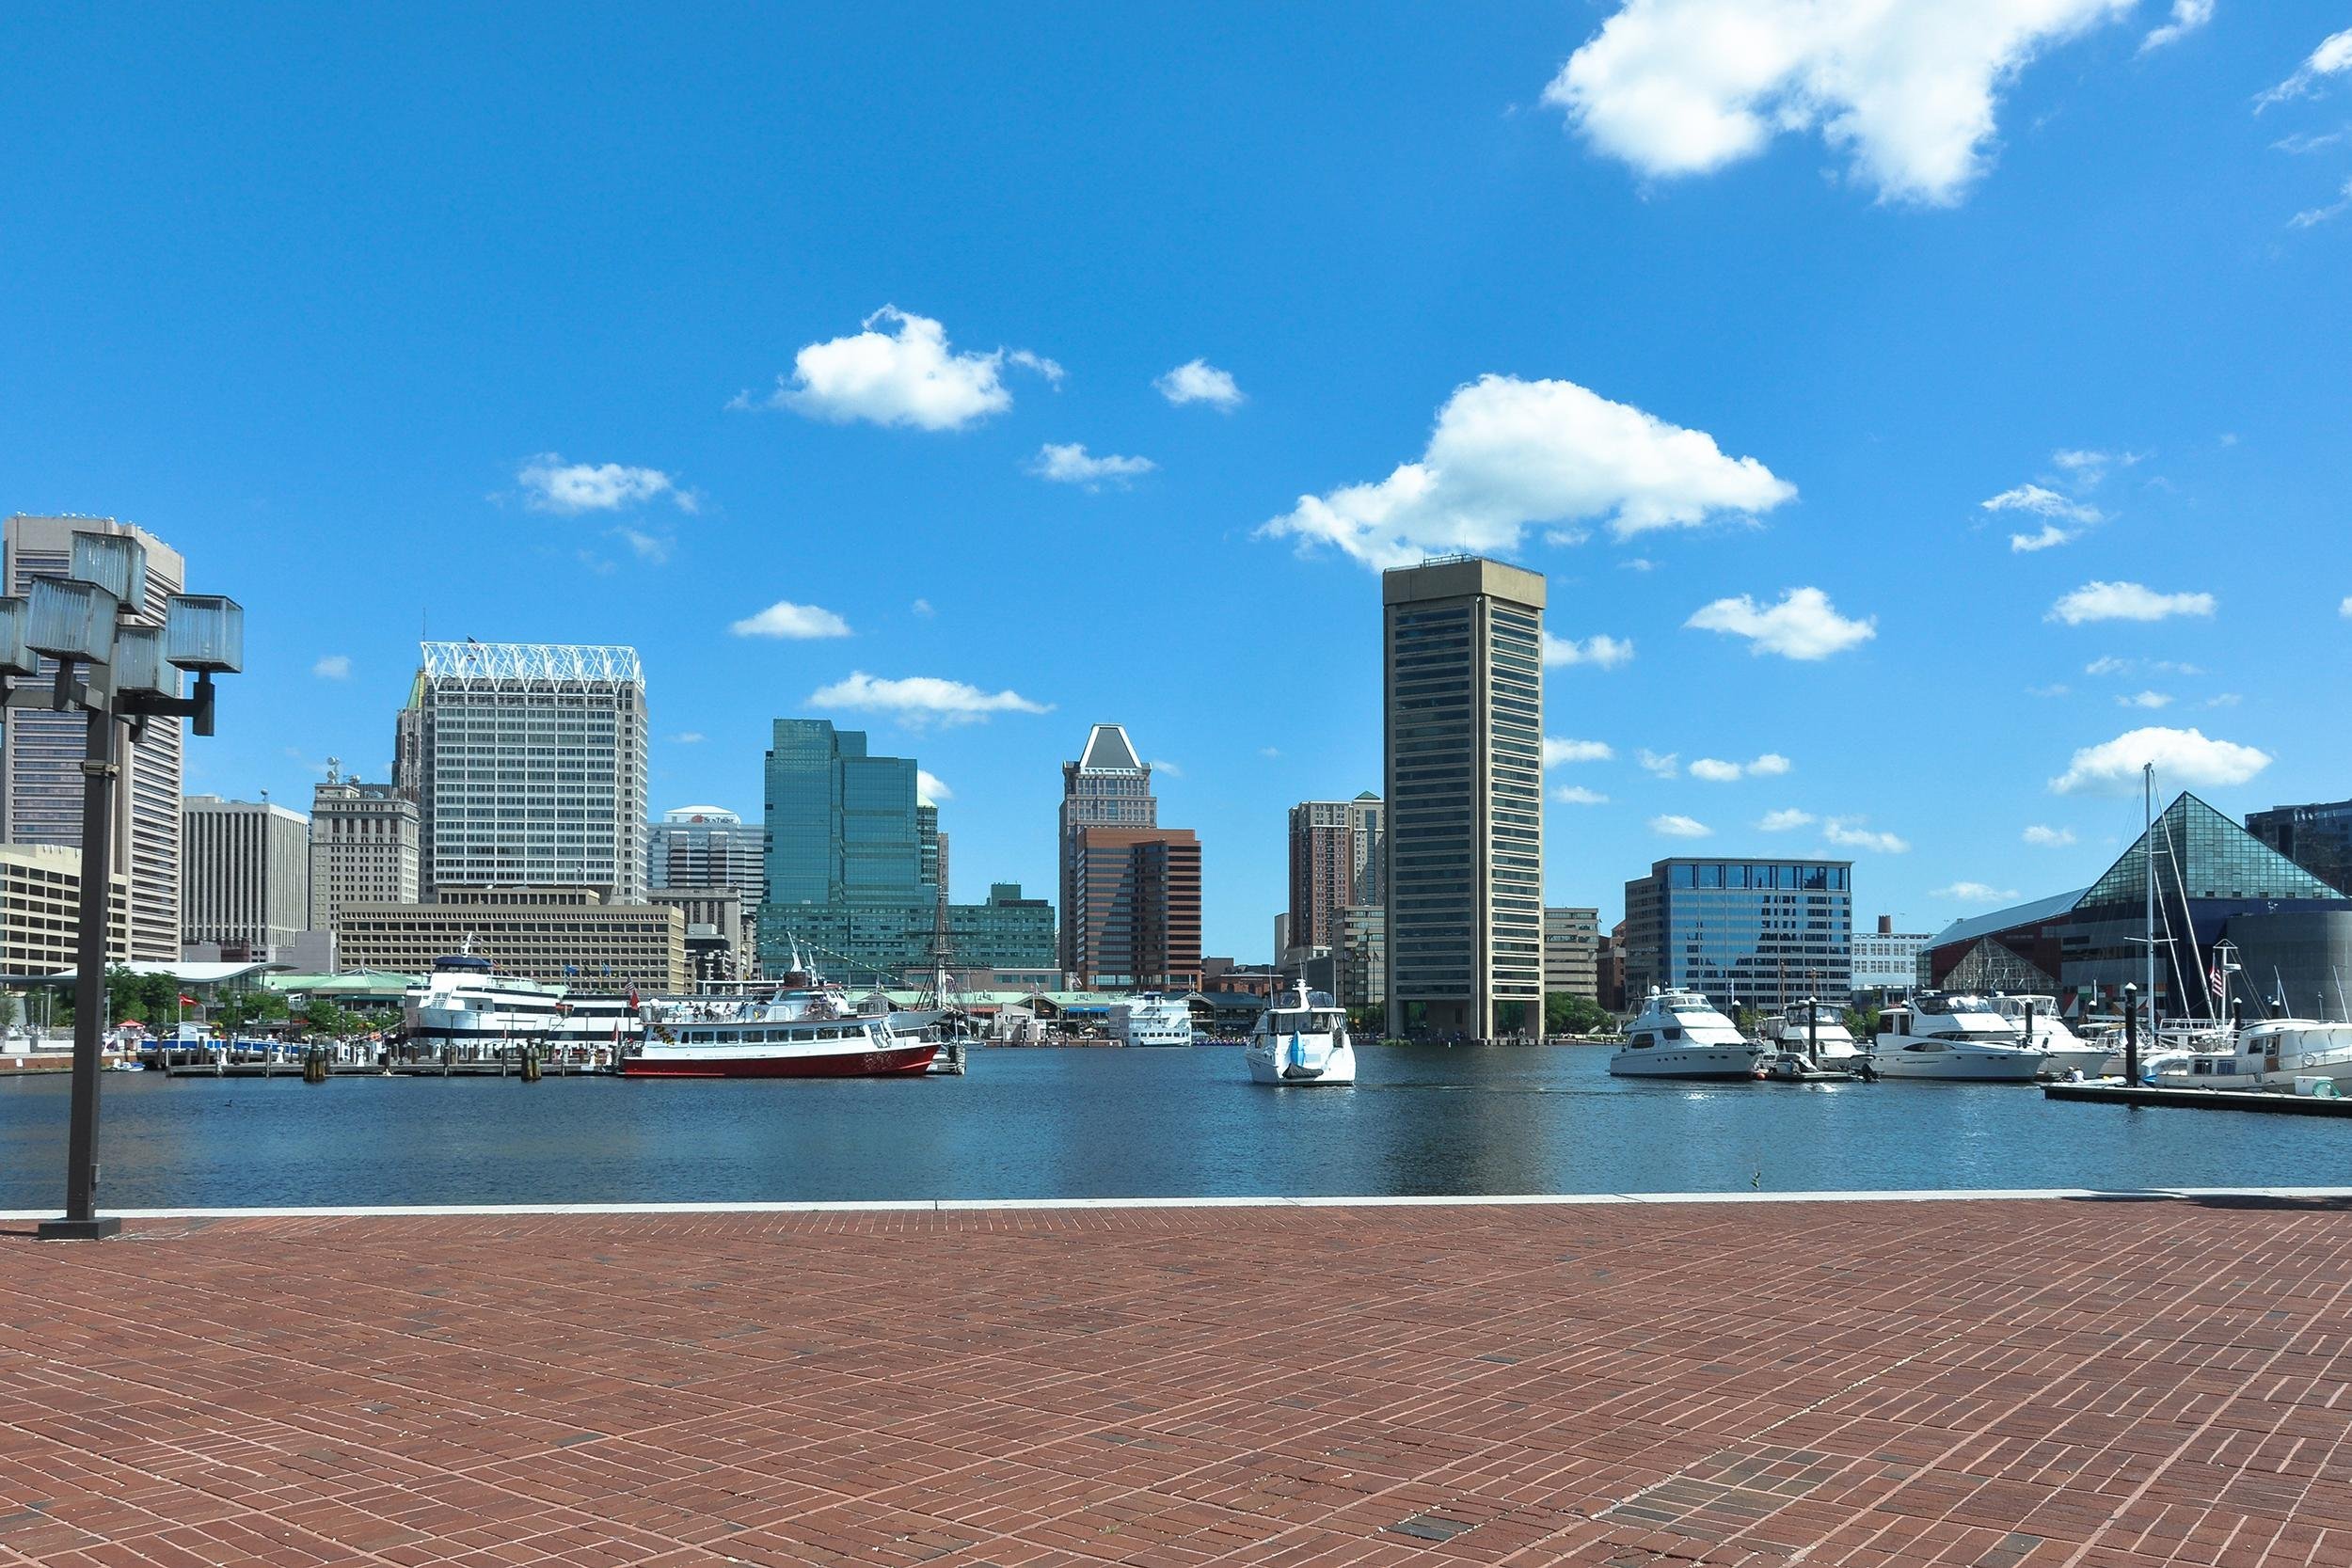 <p>The Inner Harbor is a scenic tourist destination. In spring and summer, the juxtaposition of high-rise buildings with boats on the water makes for a great photo, even without your smiling face in the center. This is one instance where you might want to break out a selfie stick to get as much of the city and harbor in the photo as possible.  </p>